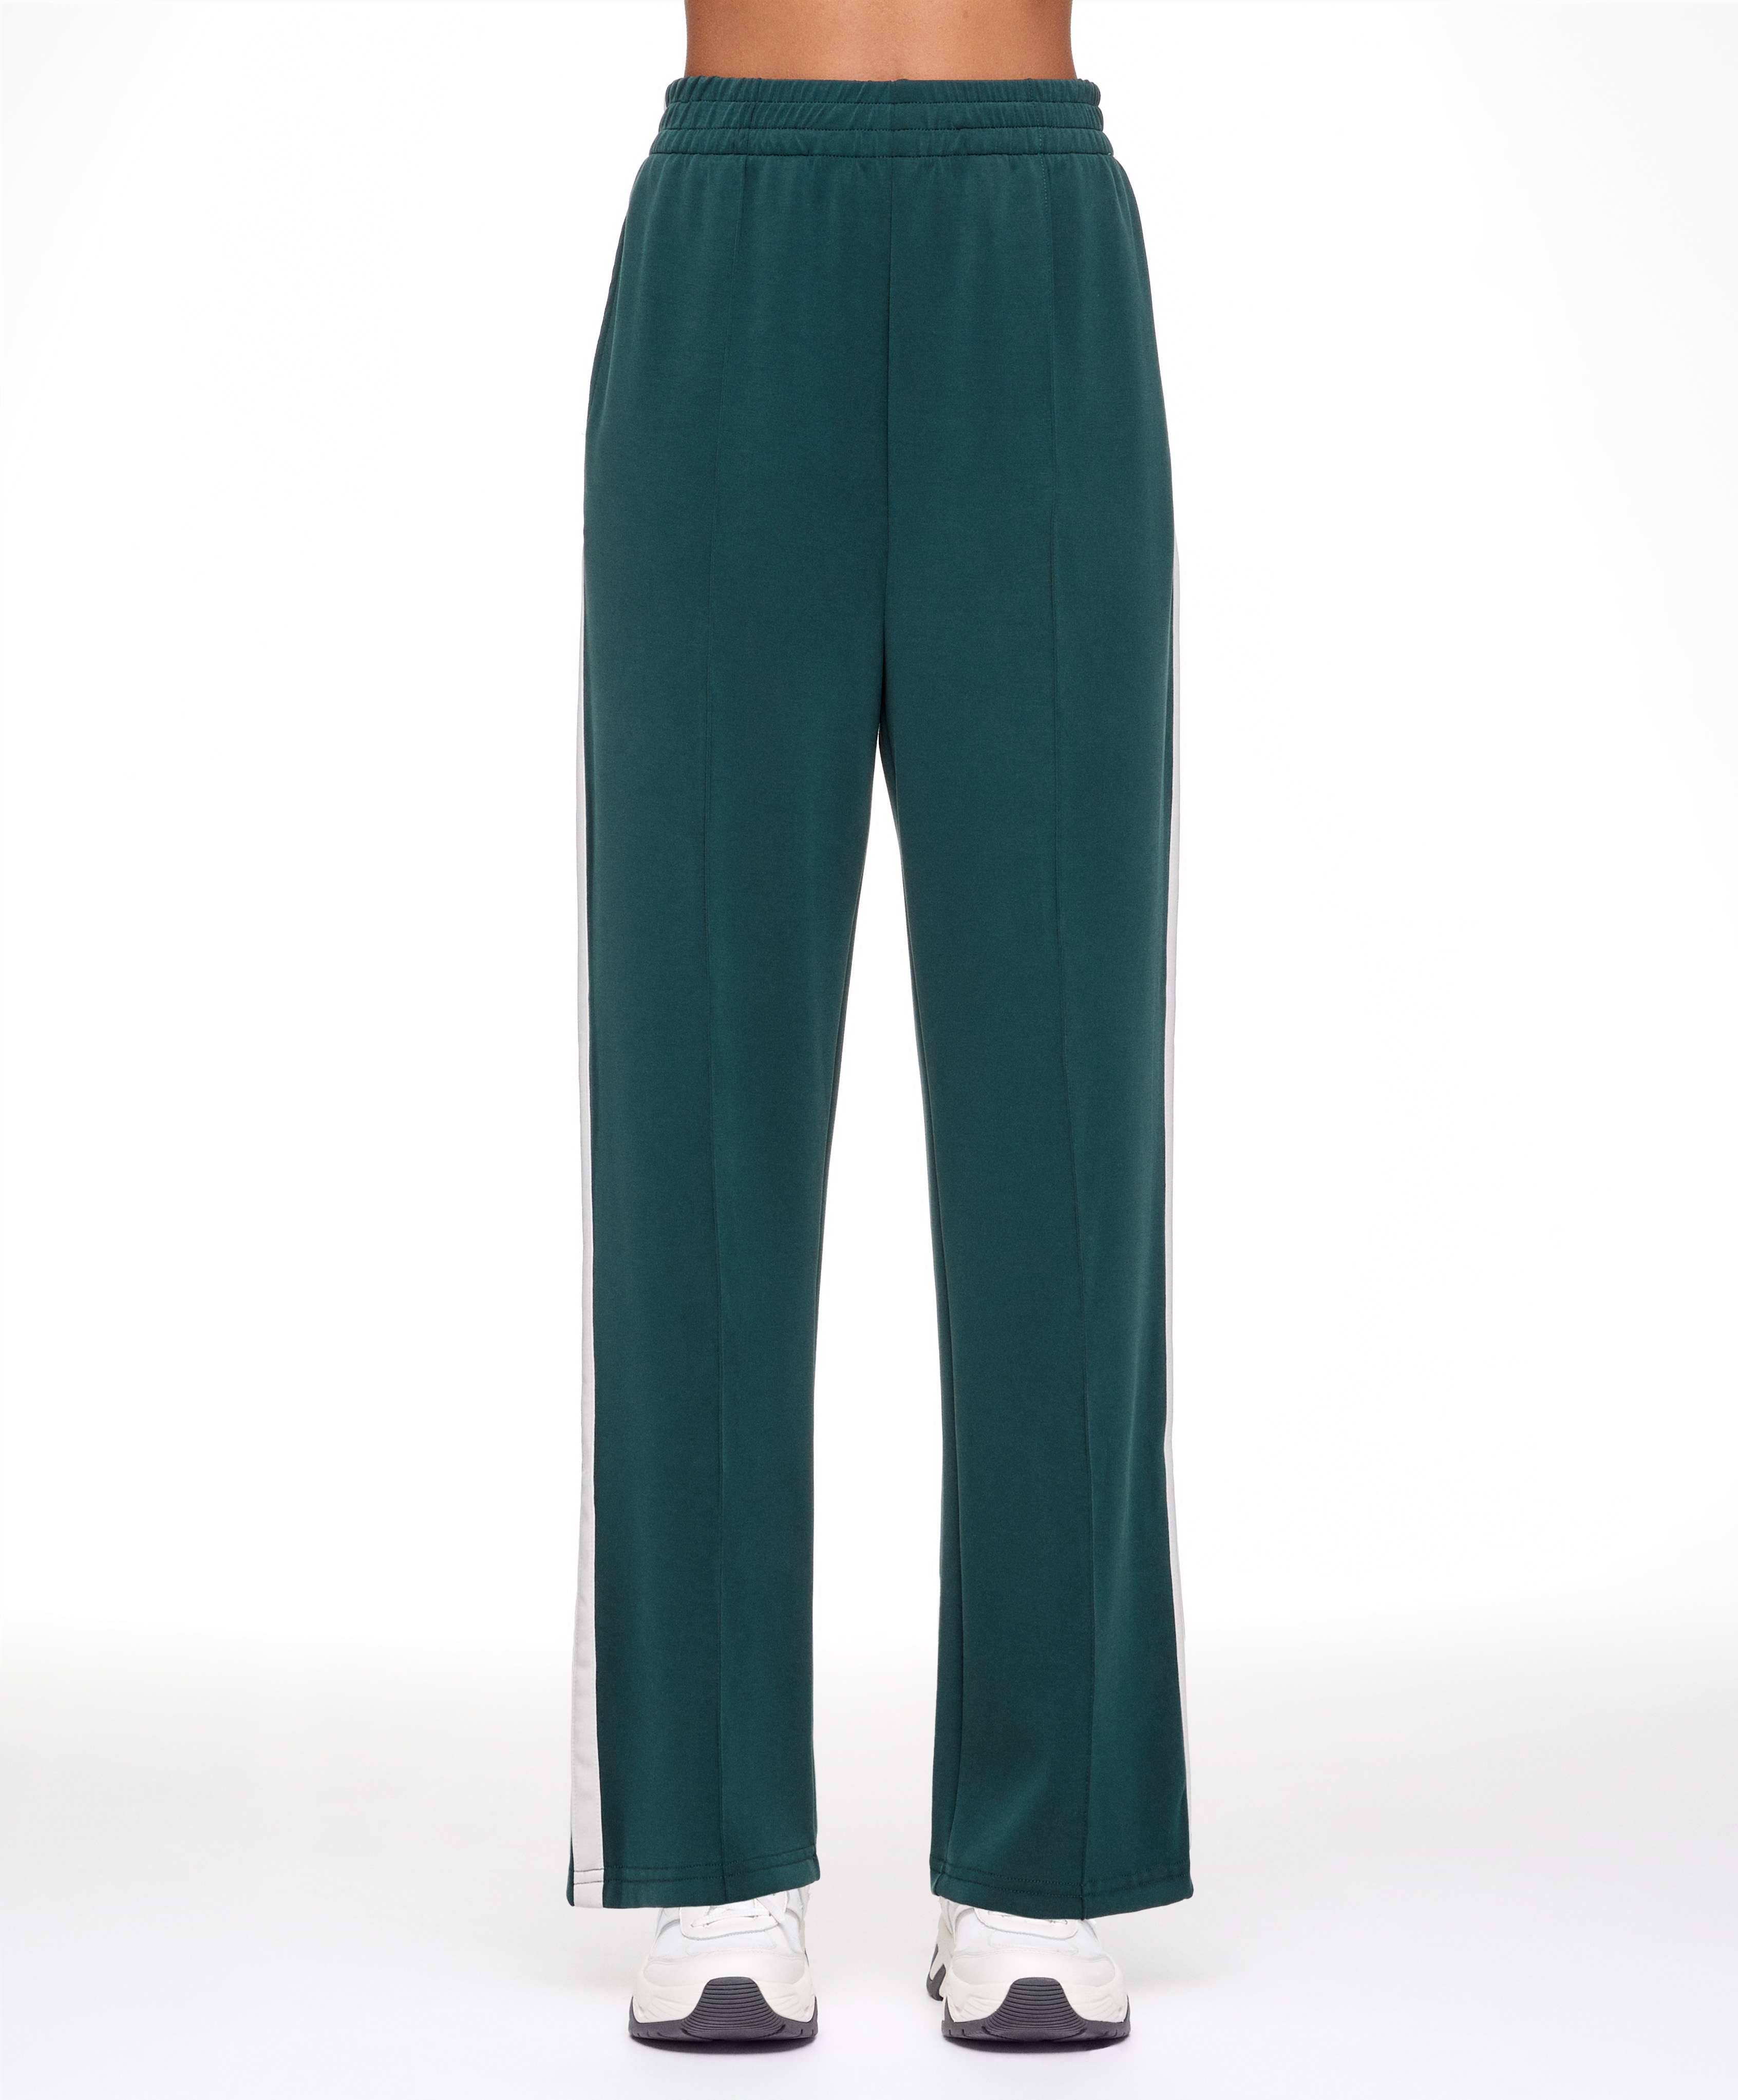 Soft touch modal trousers with straight leg and stripe